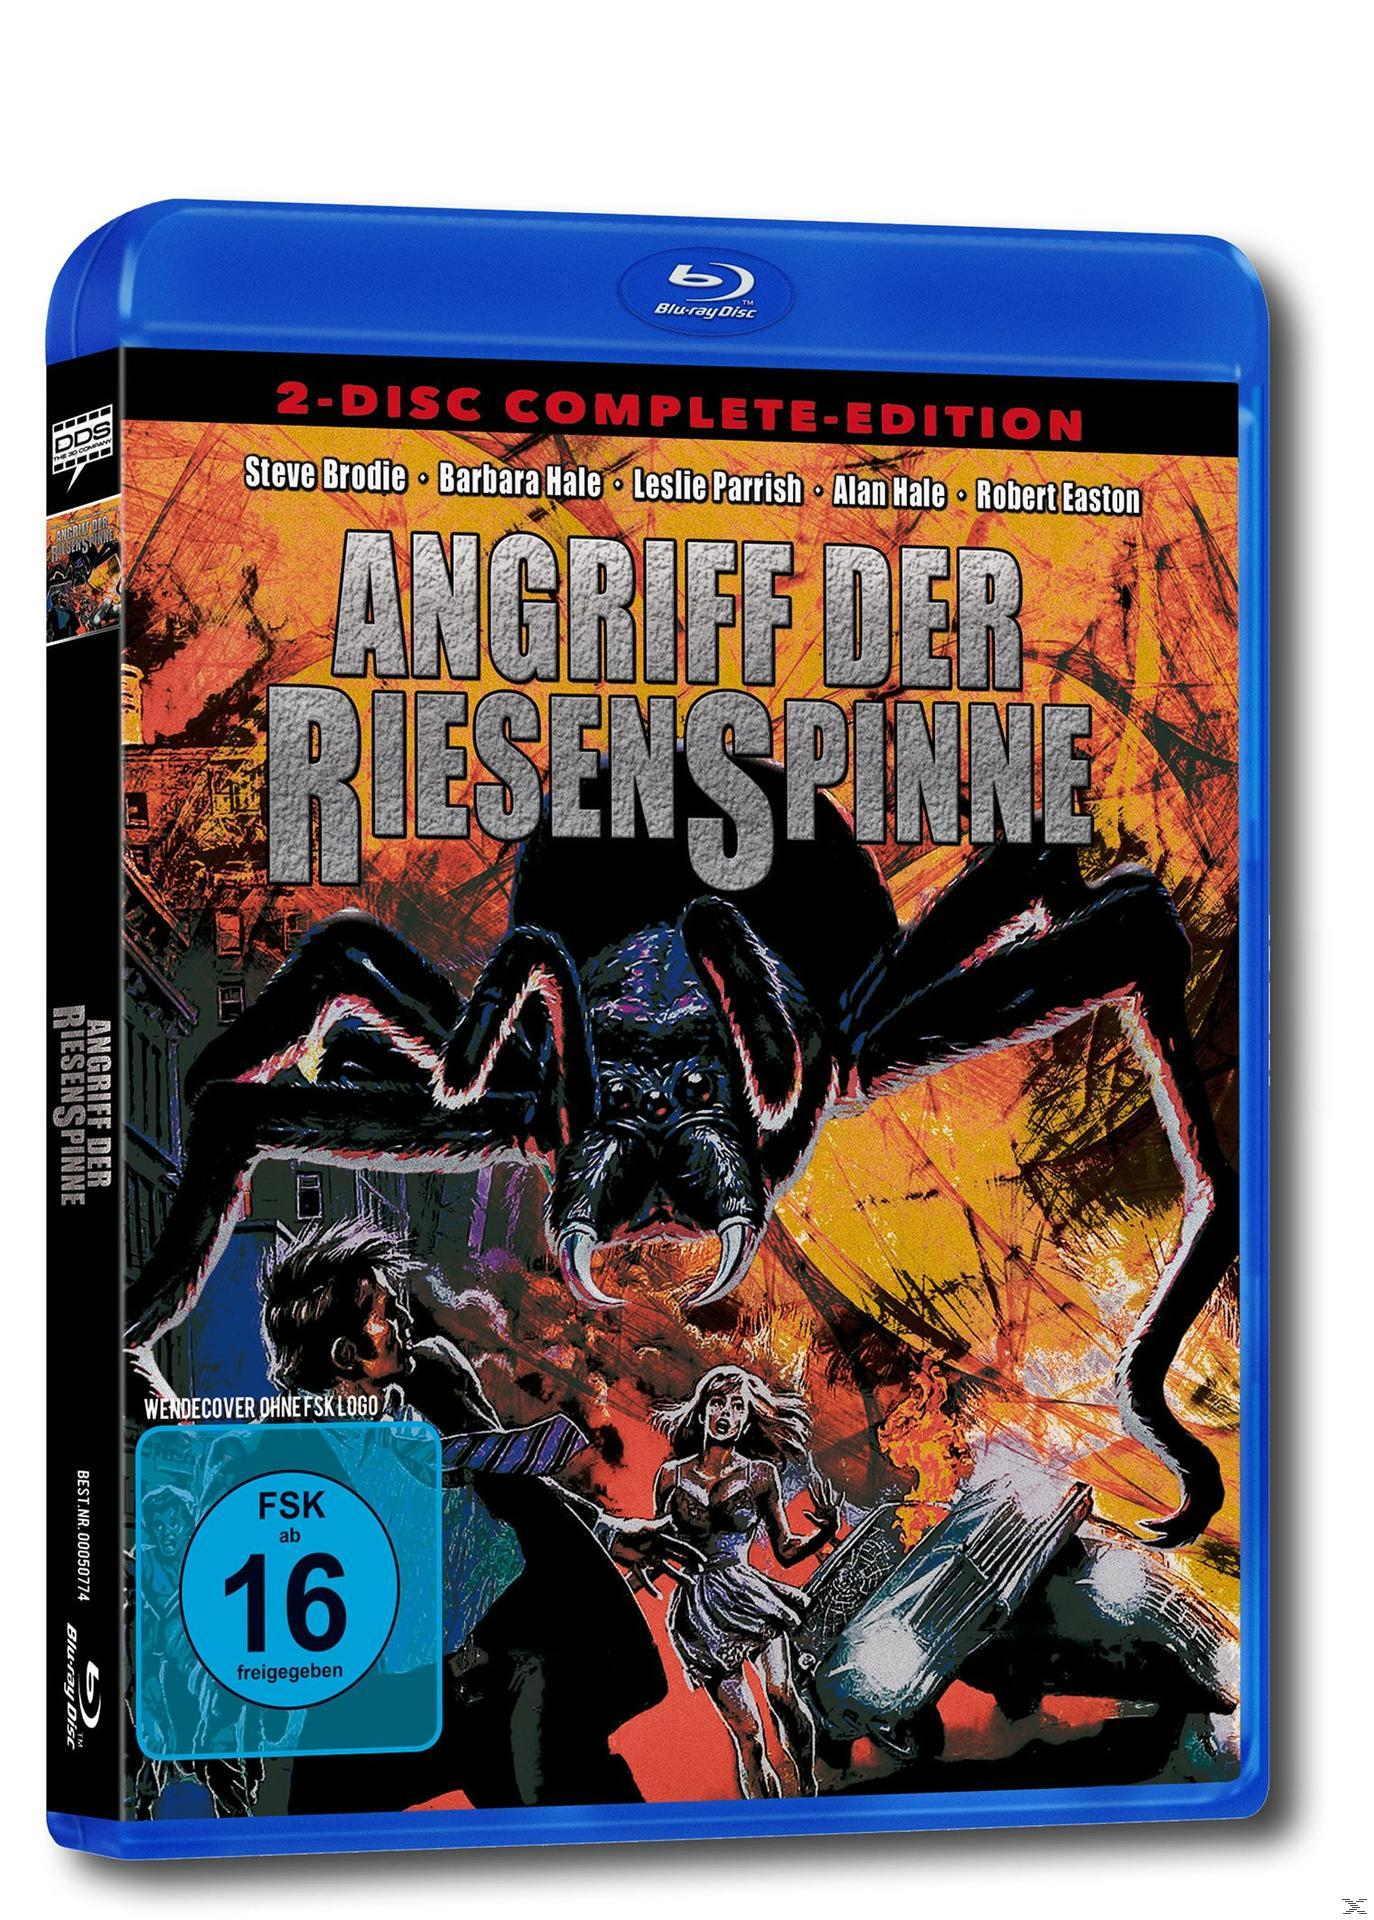 Riesenspinne Complete der Edition Angriff - Blu-ray